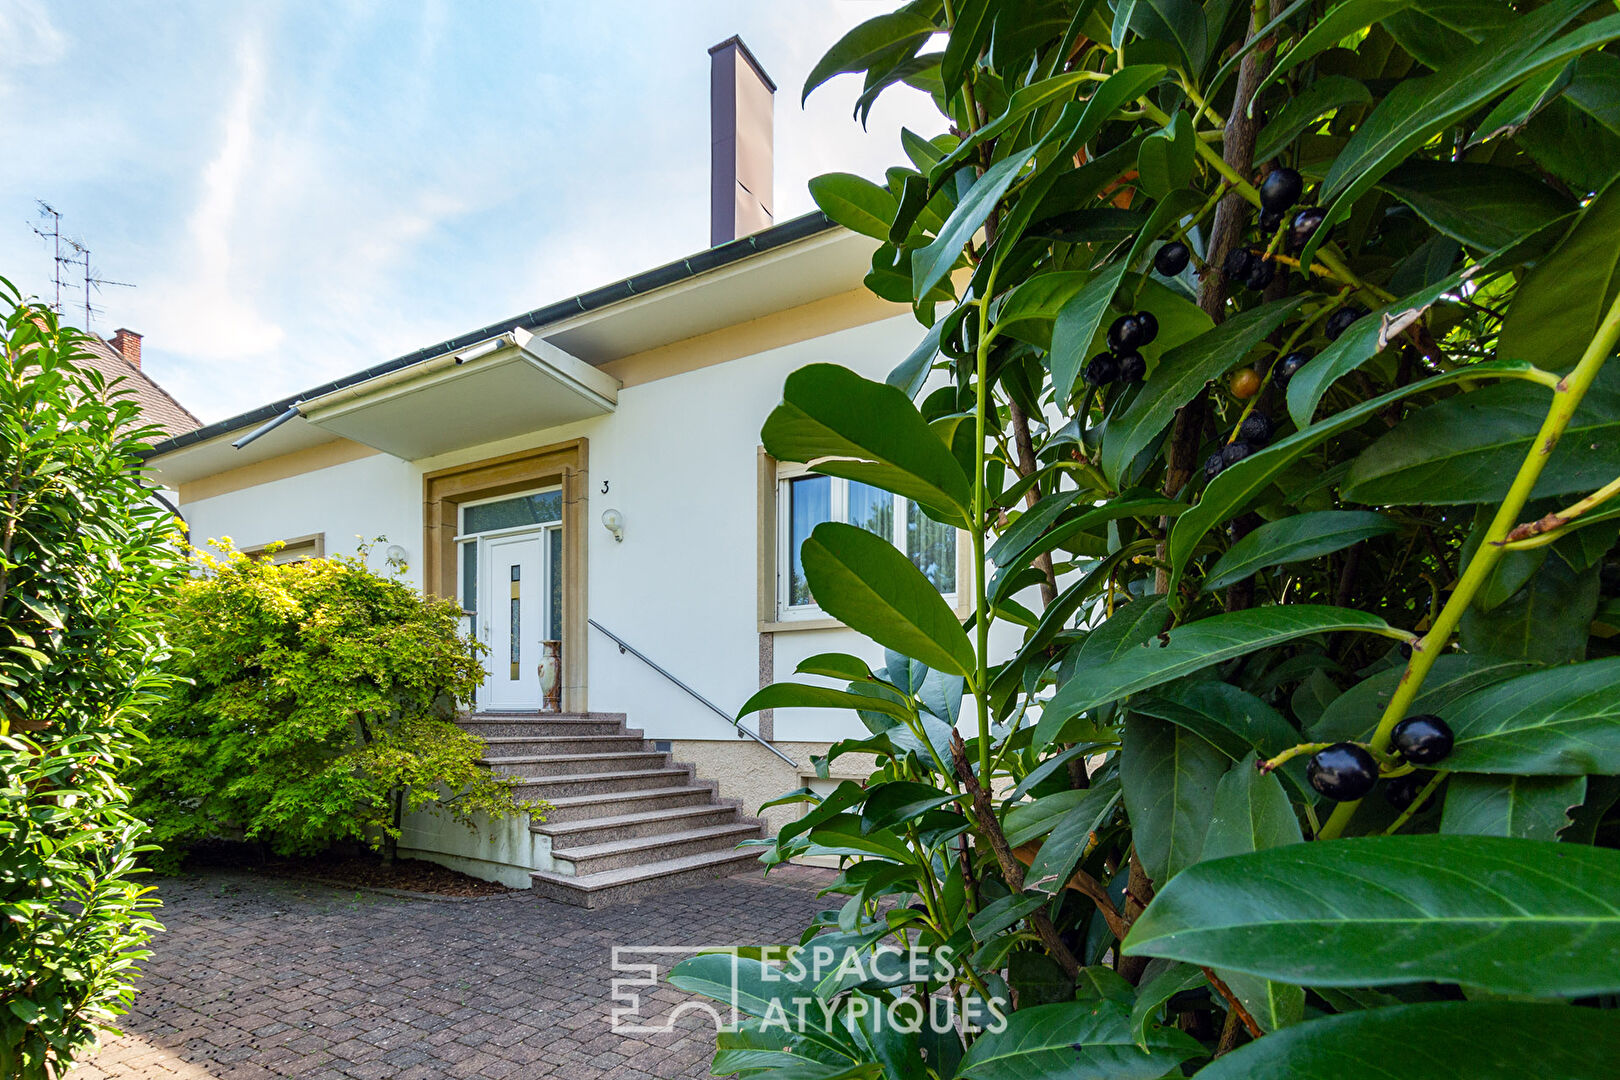 60s villa ideal for rental investment